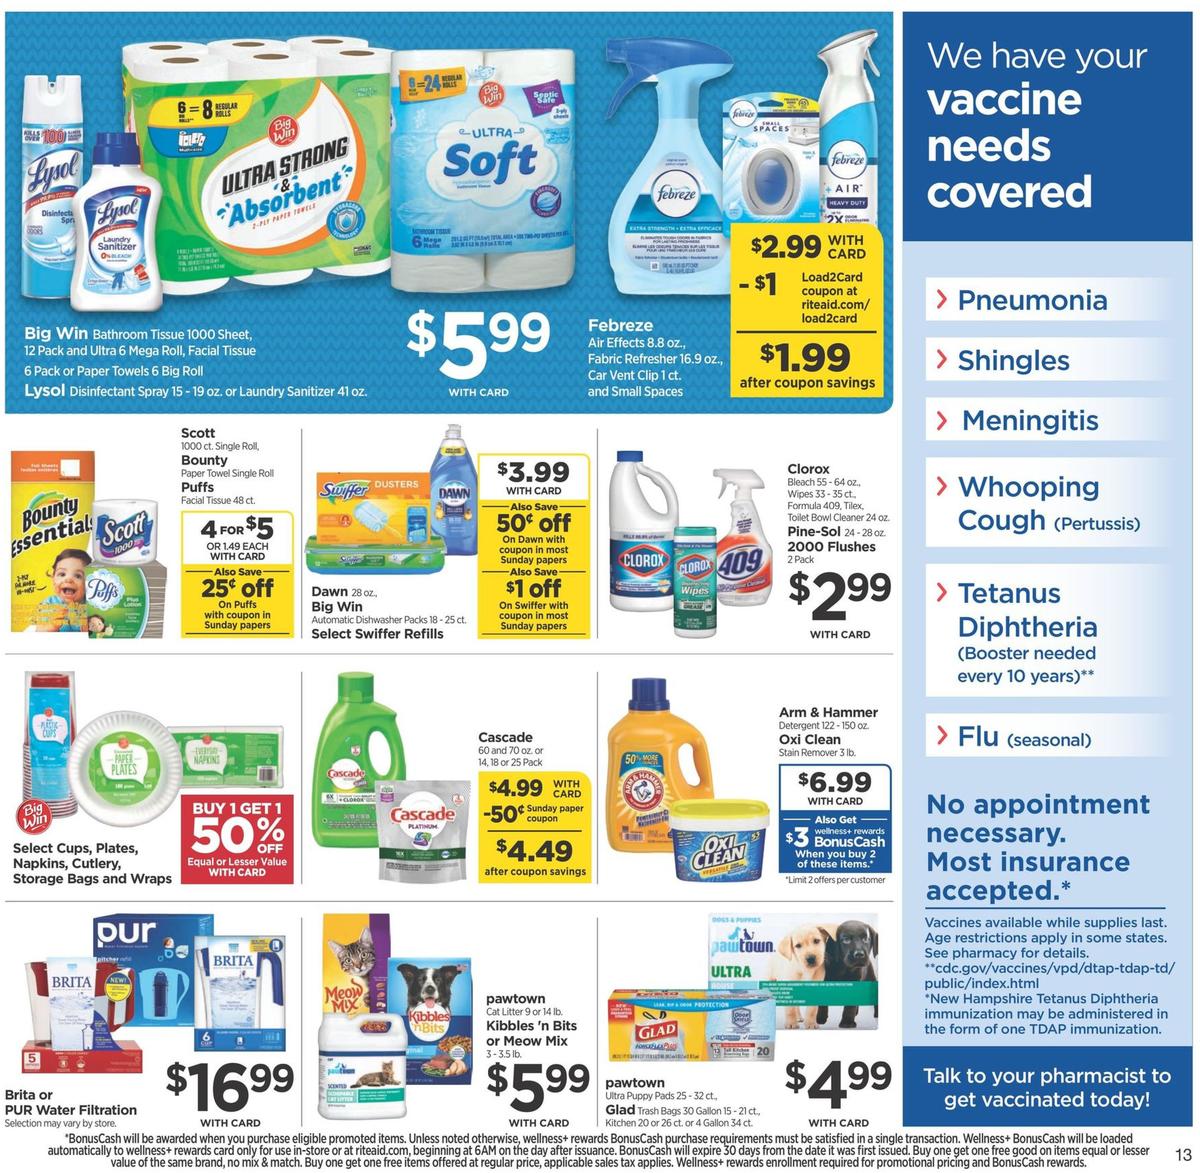 Rite Aid Weekly Ad from November 24